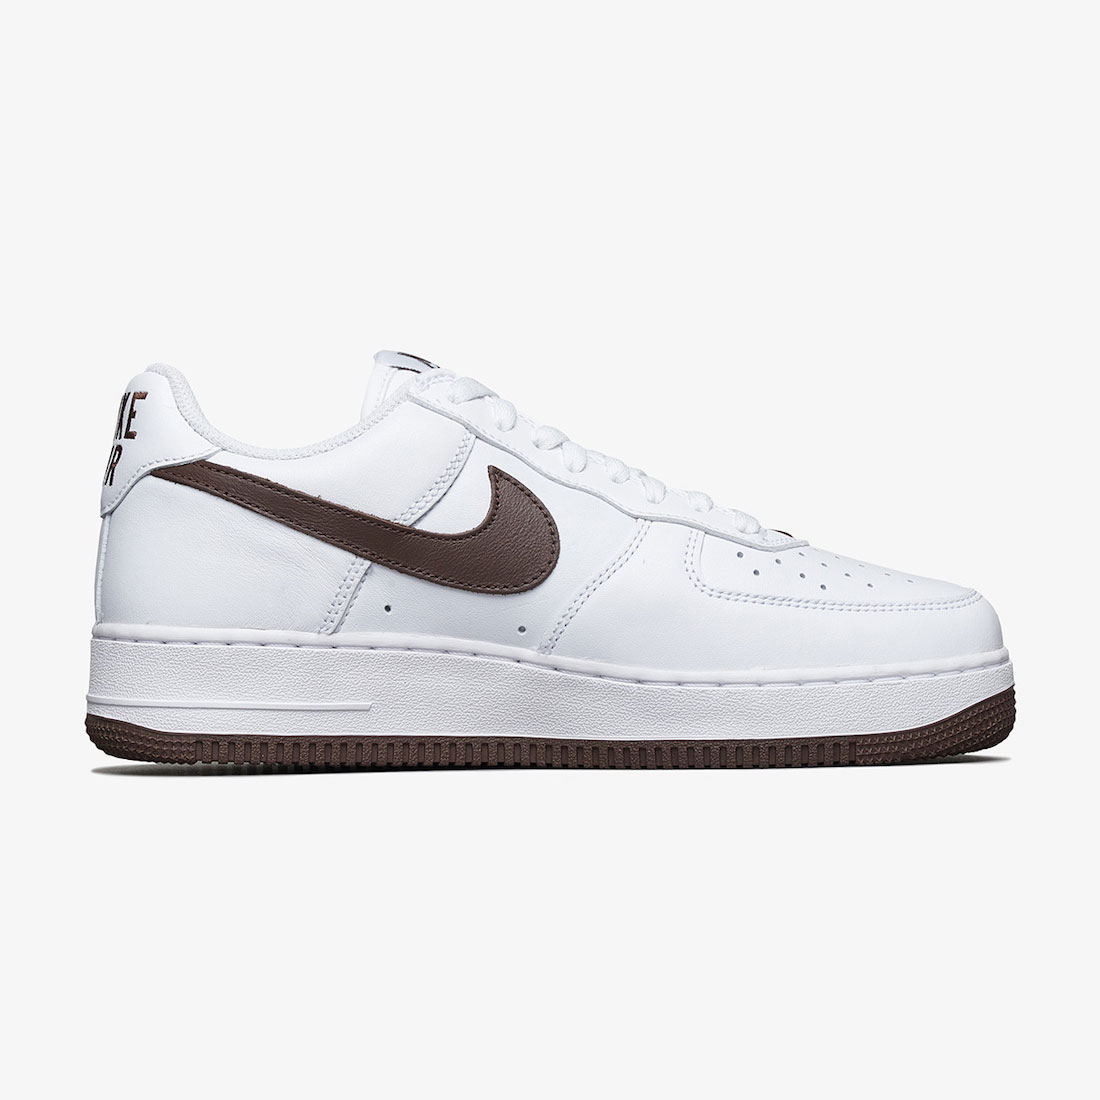 Nike Air Force 1 Low “White Chocolate” DM0576-100